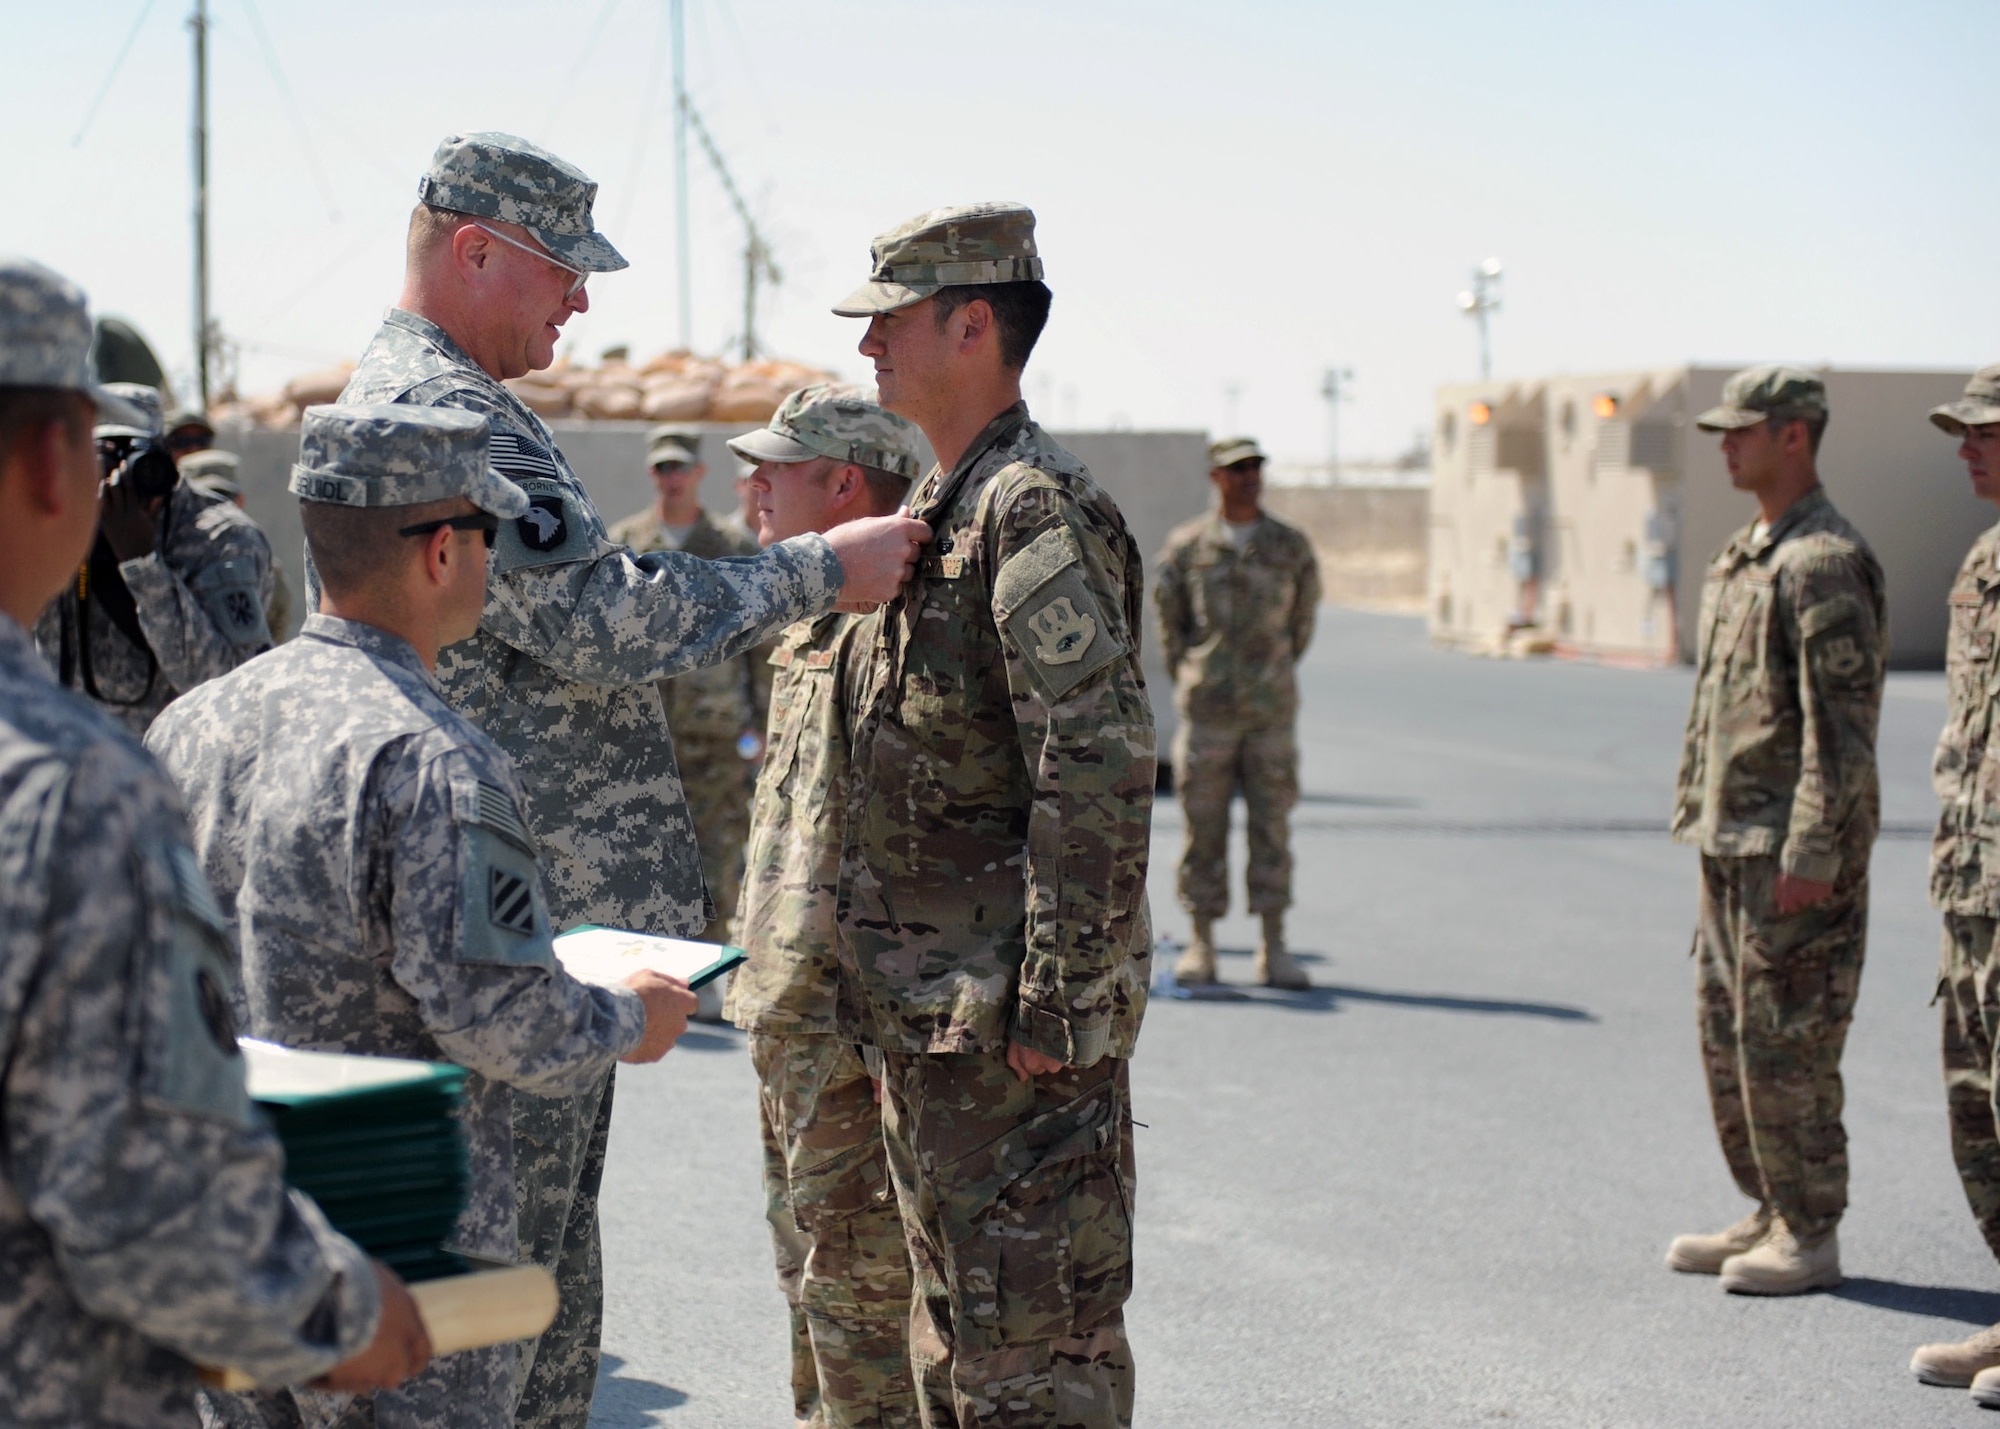 SOUTHWEST ASIA -  Army Col. Randall McIntire, 69th Air Defense Artillery Brigade commander, awards Air Force Capt. Ben Thomas, 557th ERHS construction site officer in charge, with an Army Commendation Medal for his team’s support of the 1-43 Air Defense Auxiliary Battalion, April 9. (U.S. Army photo/Capt. Steven Modugno)